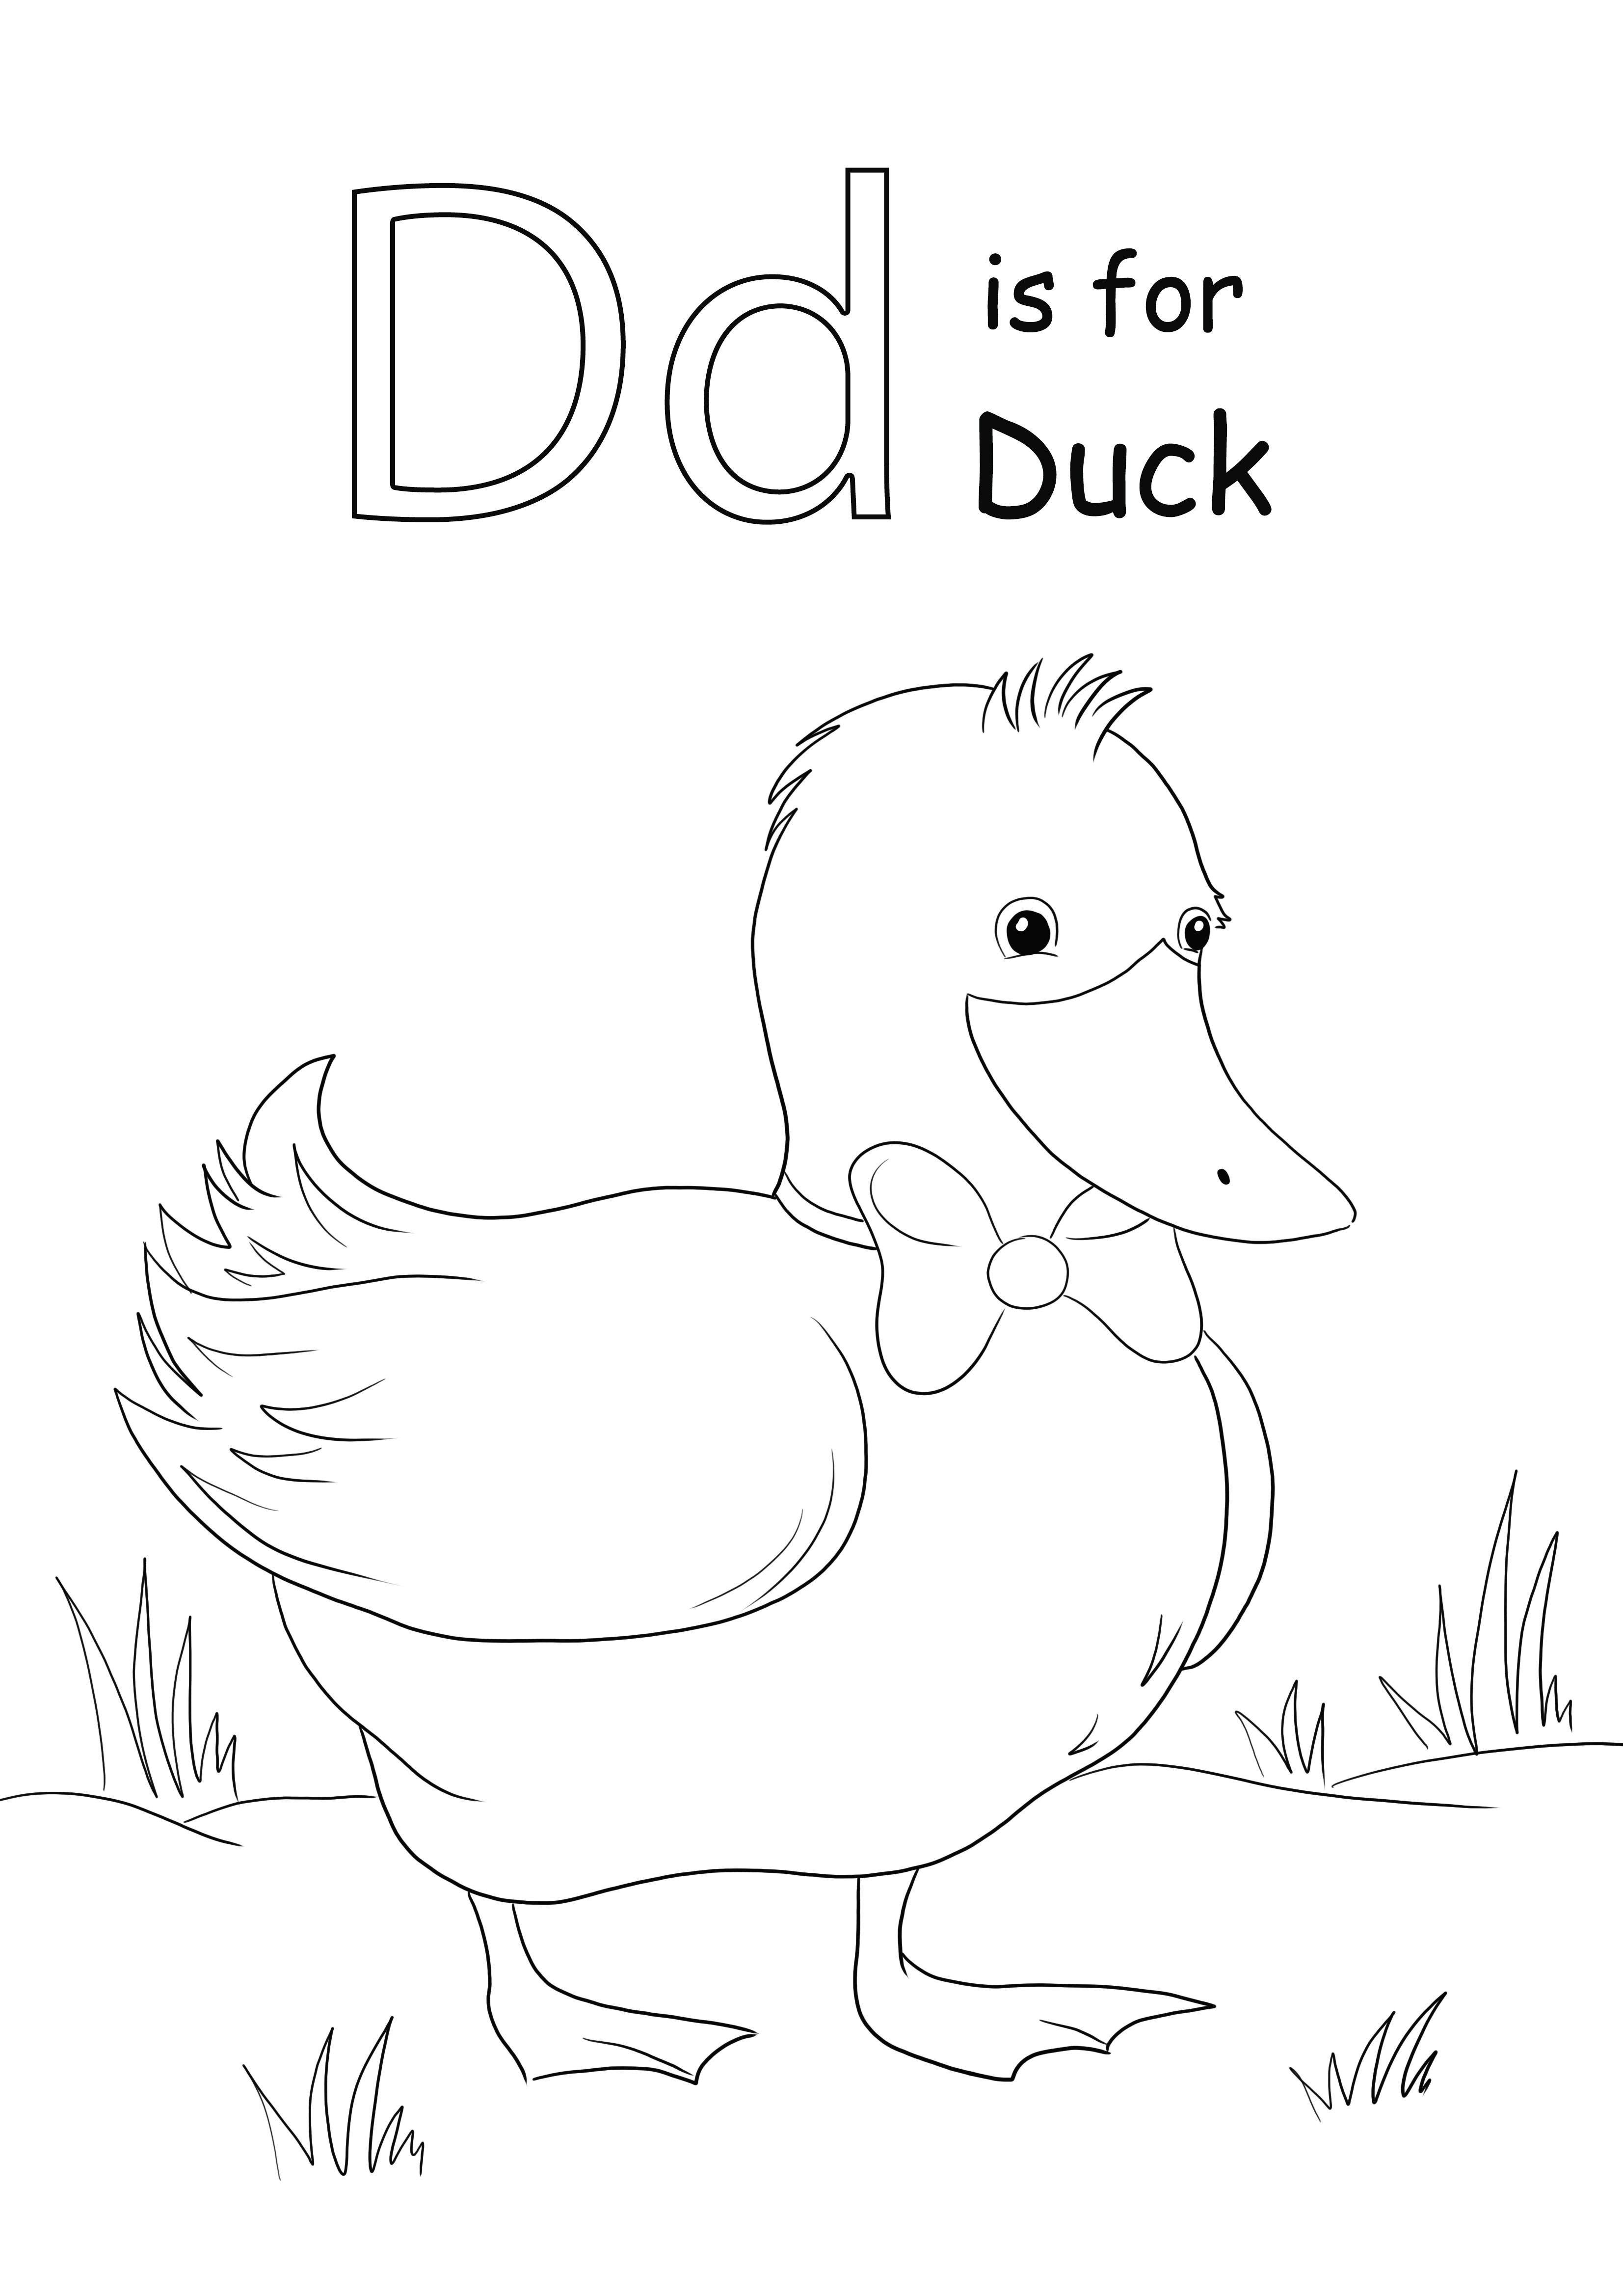 Free printing of Letter D is for Duck coloring image for kids to learn easy